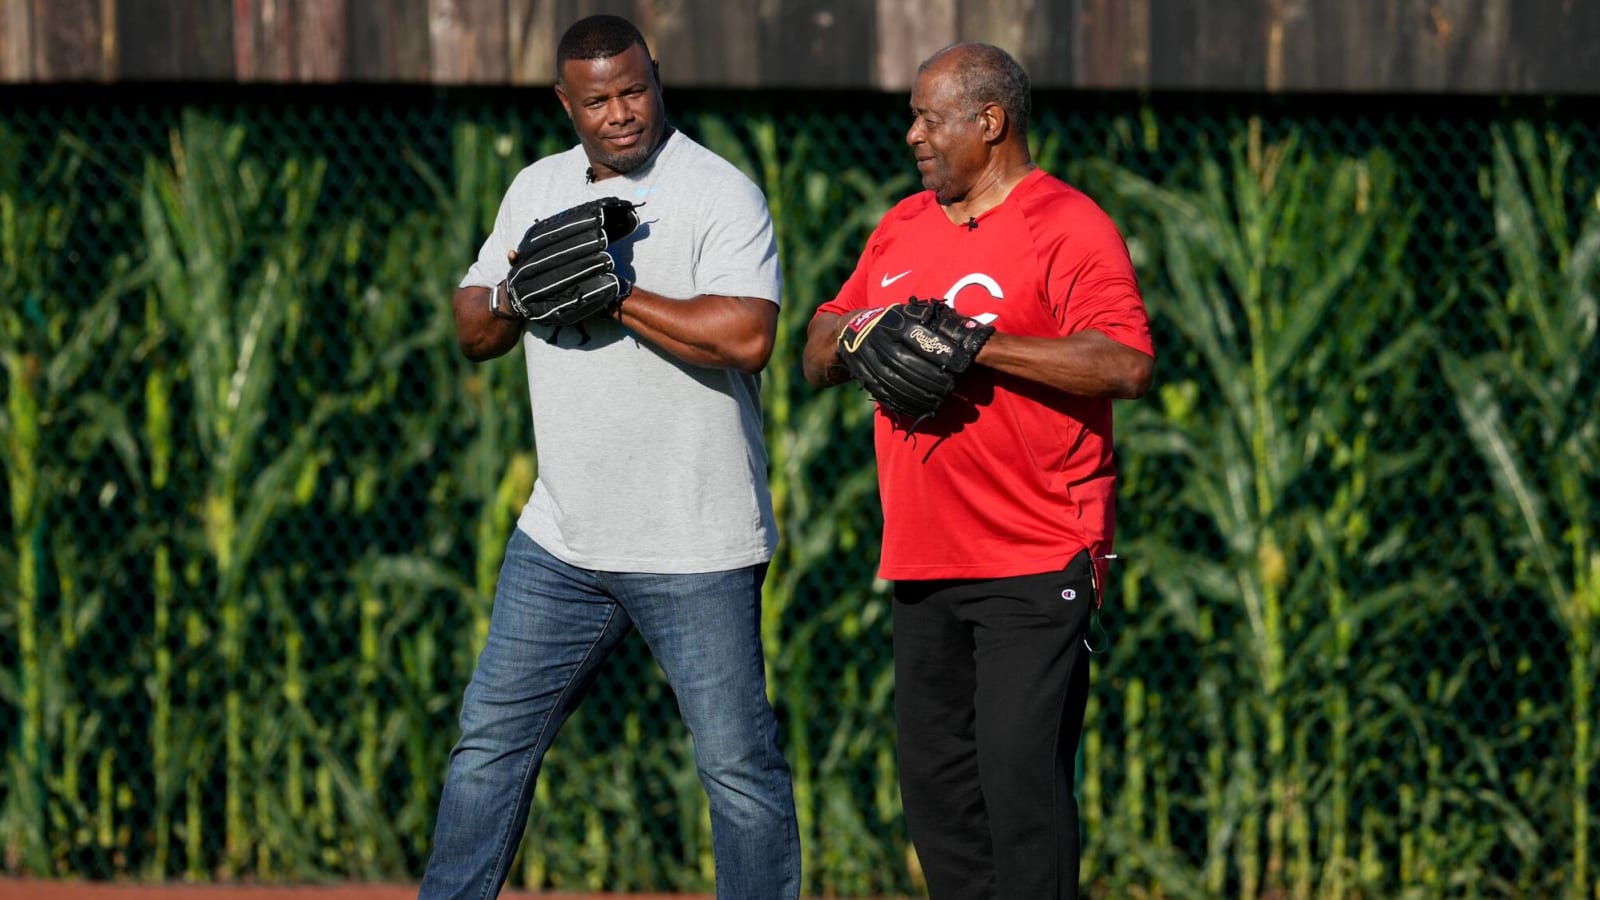 Watch: Hall of Famers Ken Griffey Jr., Sr. open Field of Dreams Game with a catch